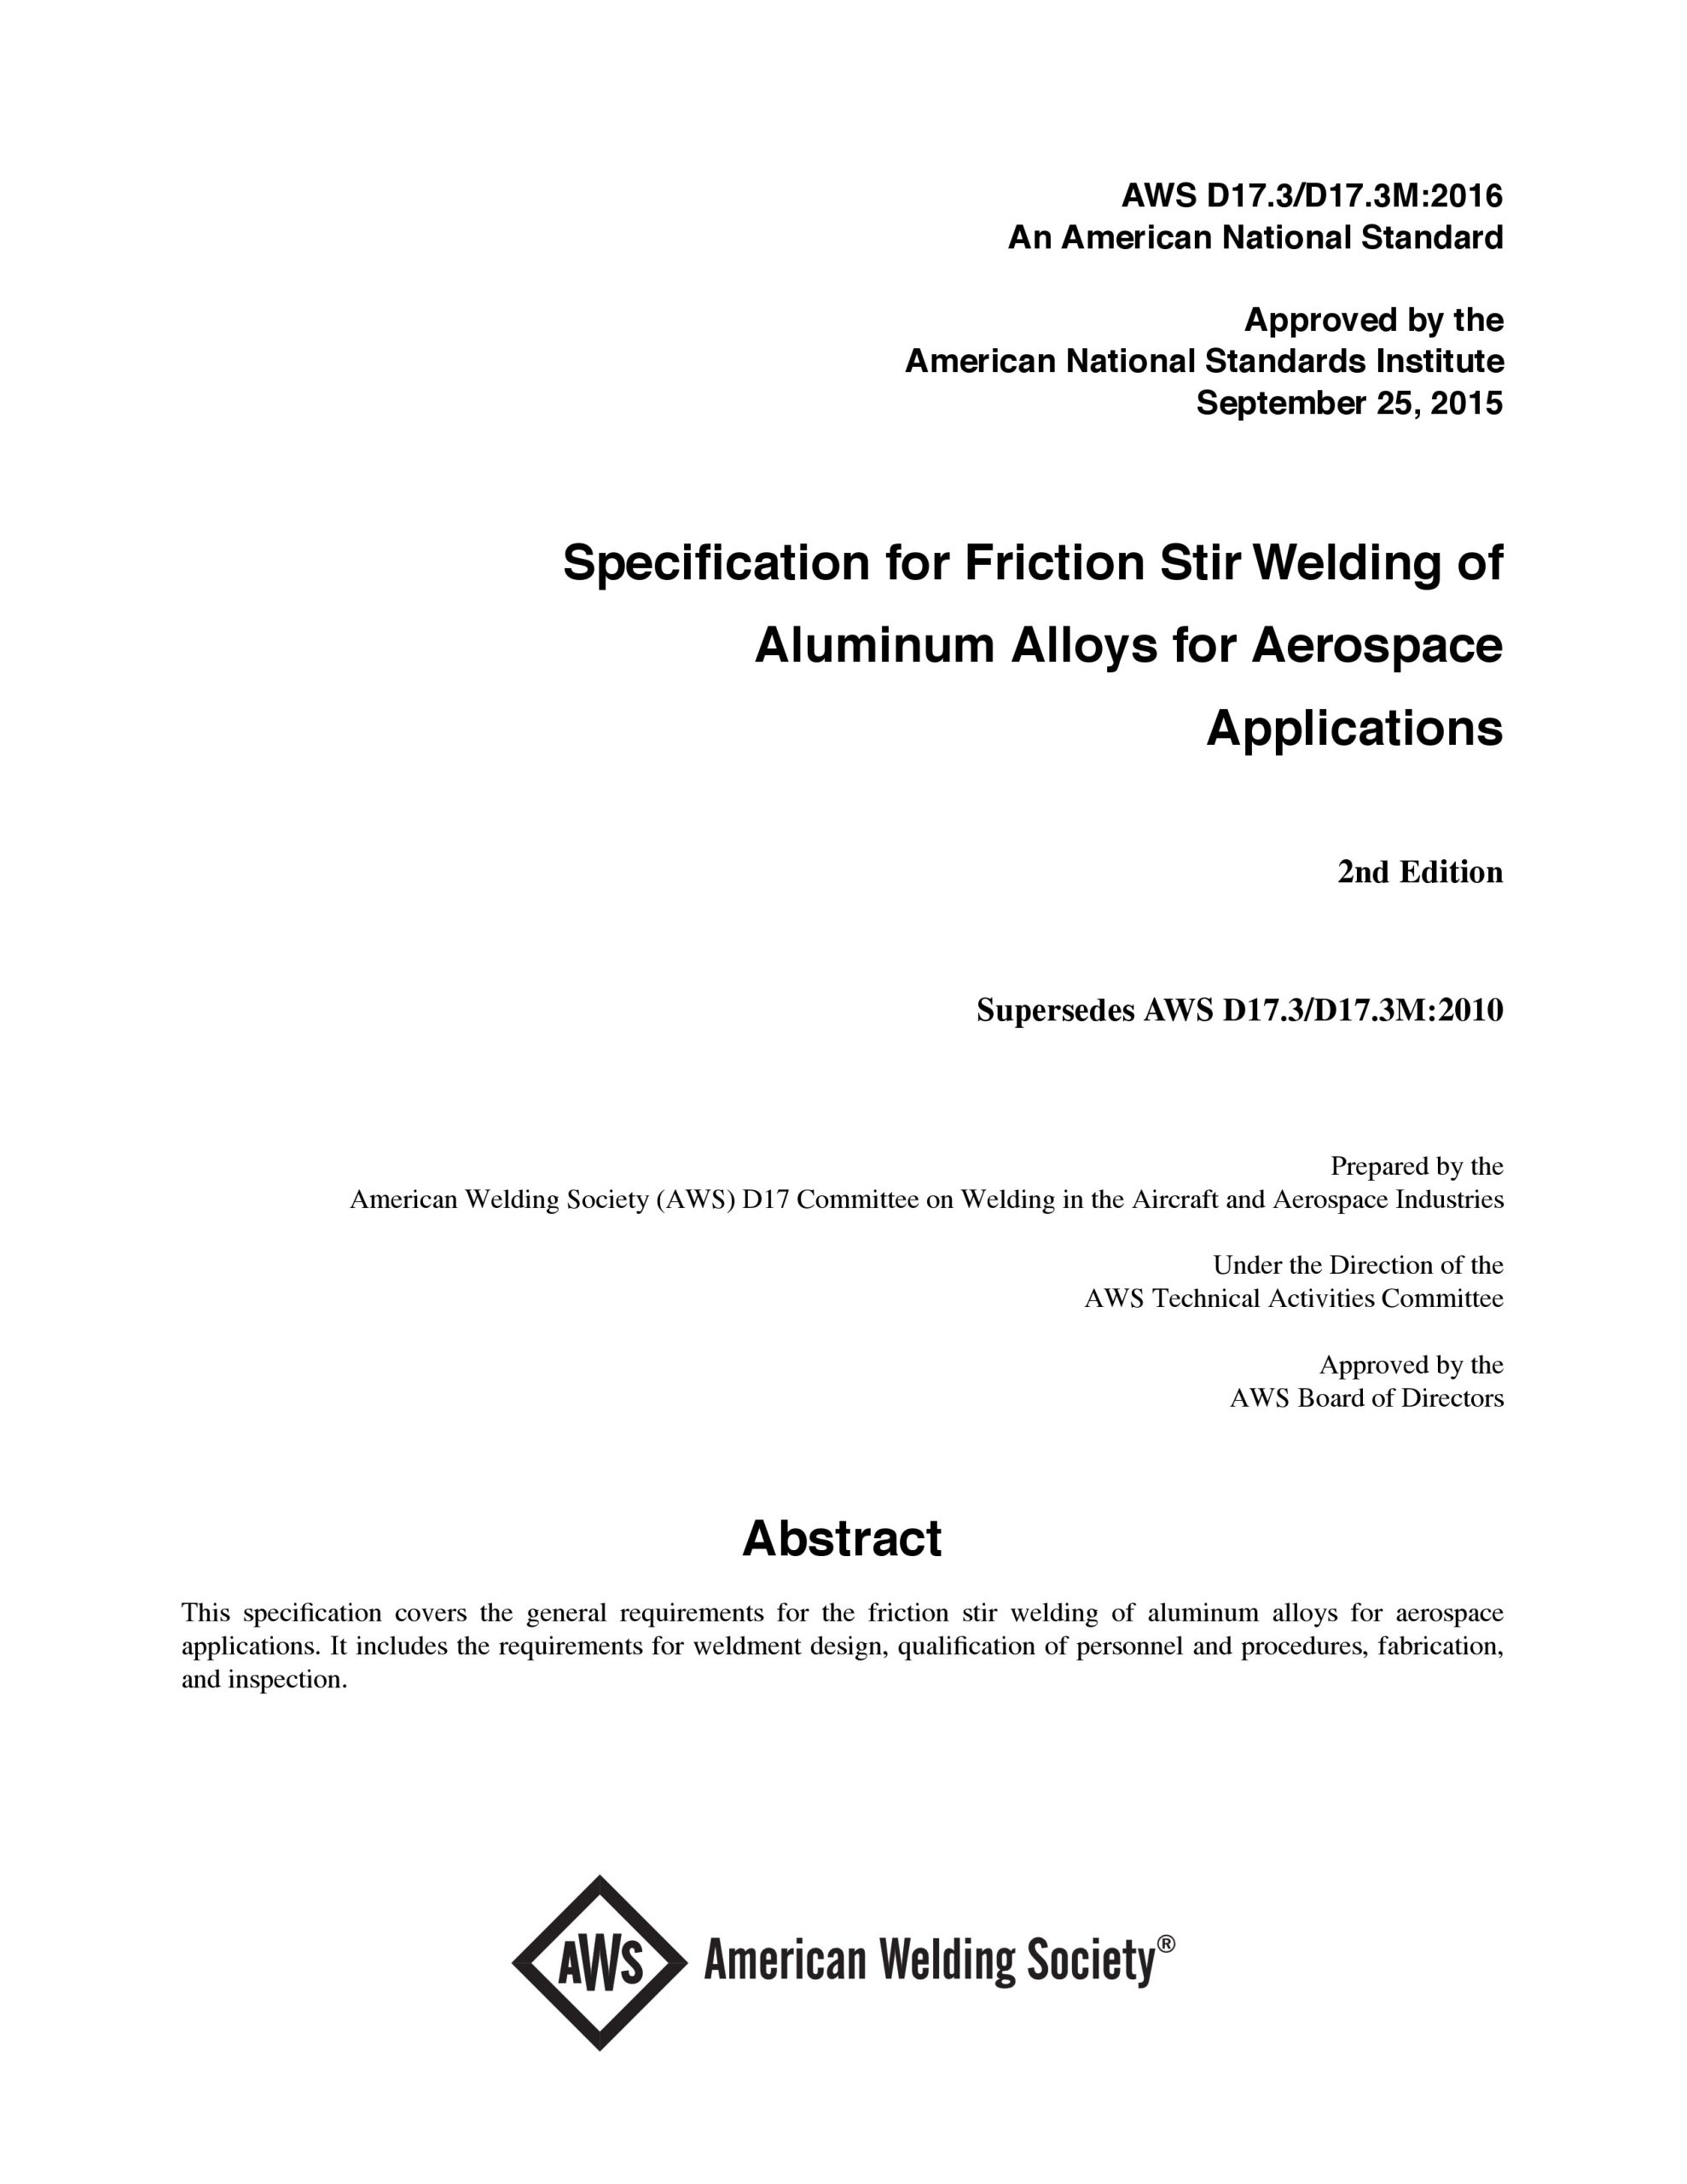 AWS D17.3/D17.3M:2016 Specification for Friction Stir Welding of Aluminum Alloys for Aerospace Applications